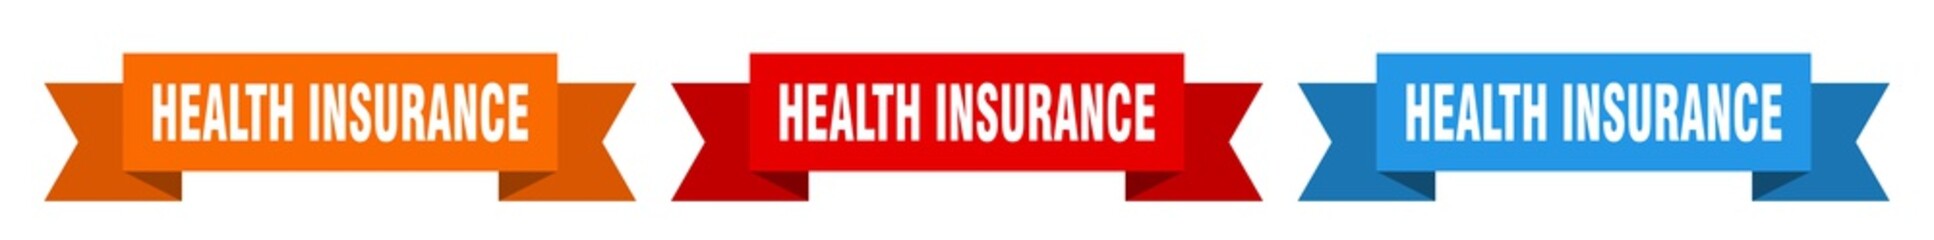 health insurance ribbon. health insurance isolated paper sign. banner